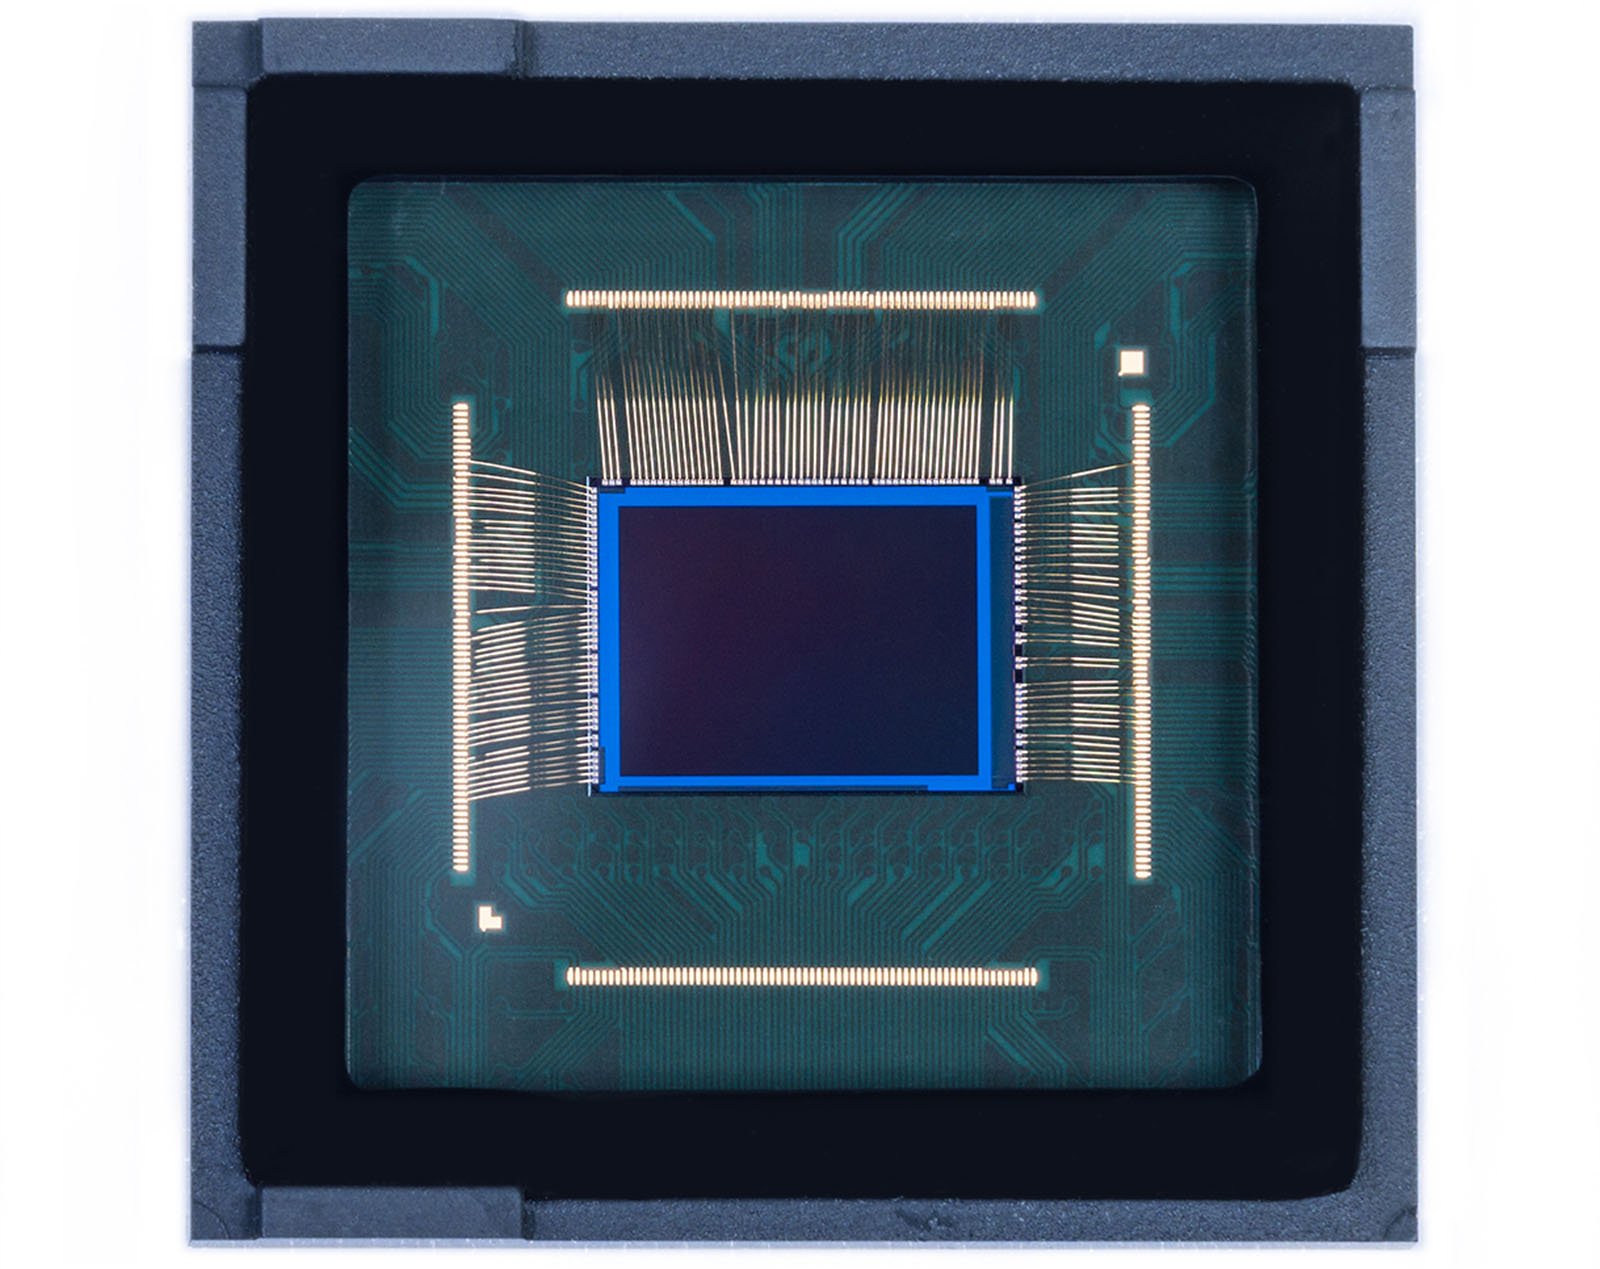 A close-up image of an electronic microchip with a blue core surrounded by numerous gold connections on a green circuit board. The chip is encased in a gray rectangular frame. The intricate wiring and connections are visible, highlighting the complexity of the microchip.